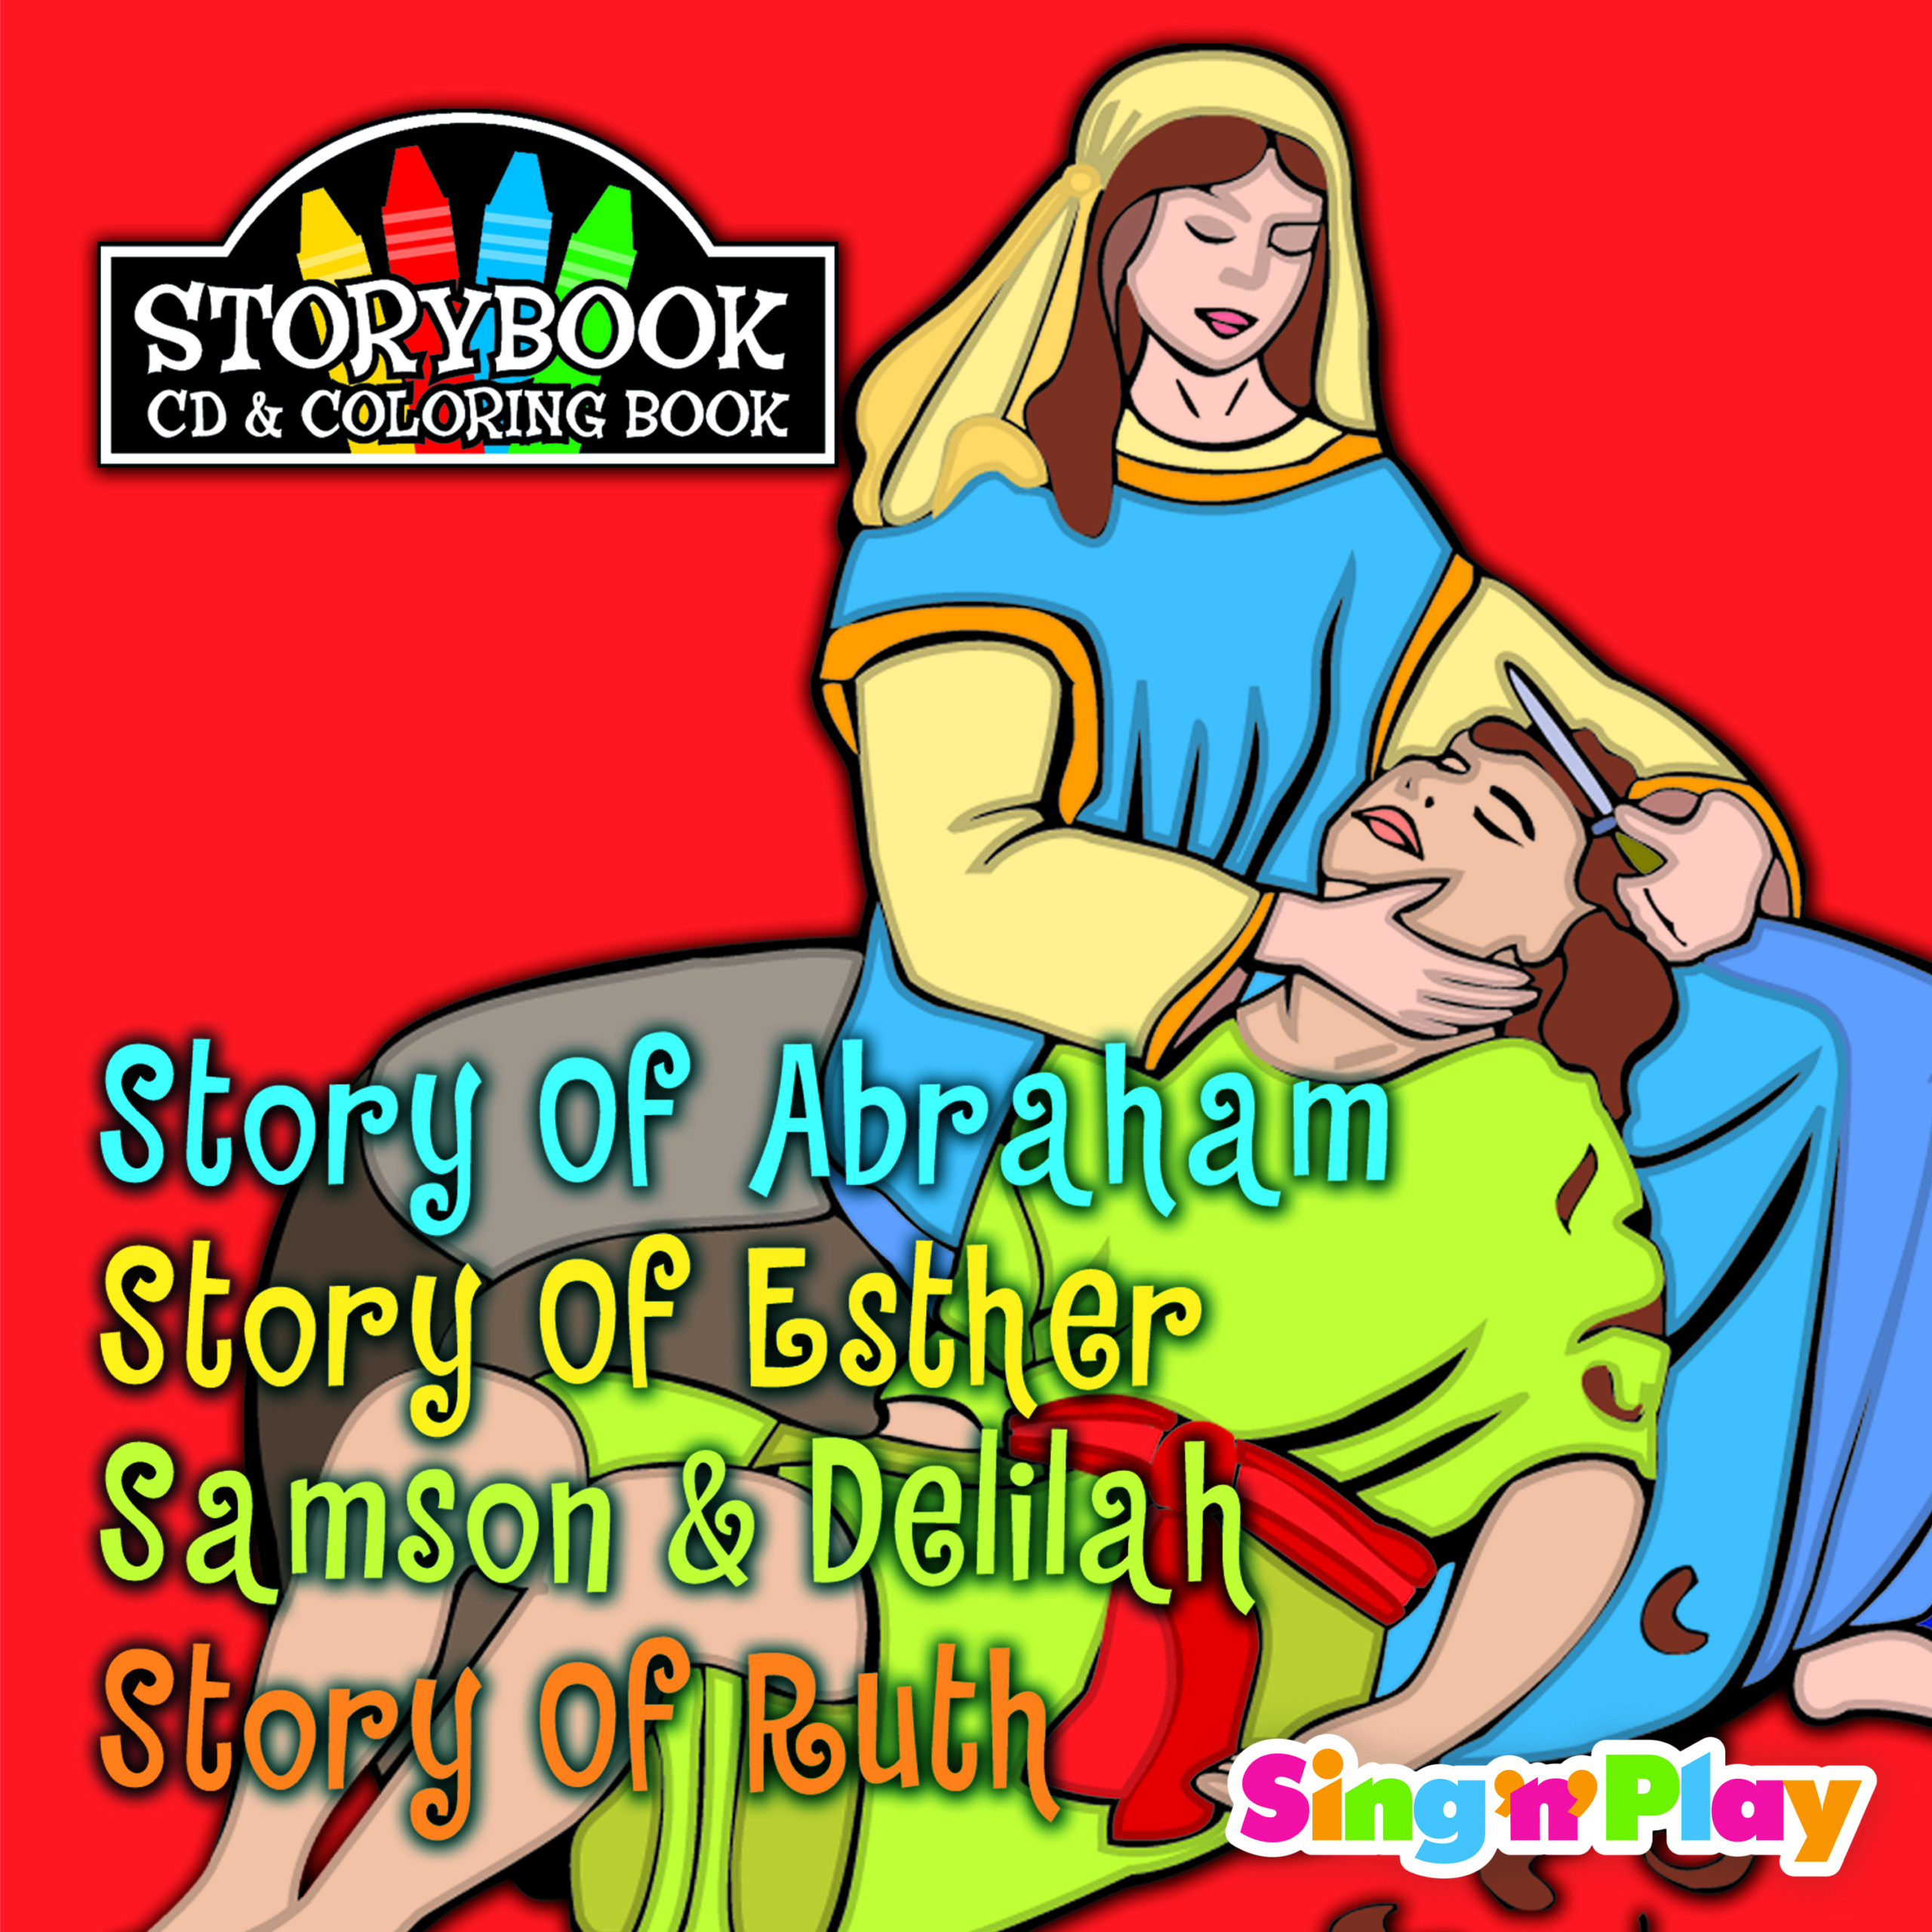 Storybook Storytellers: Story of Abraham, Story of Esther, Samson & Delilah, Story of Ruth